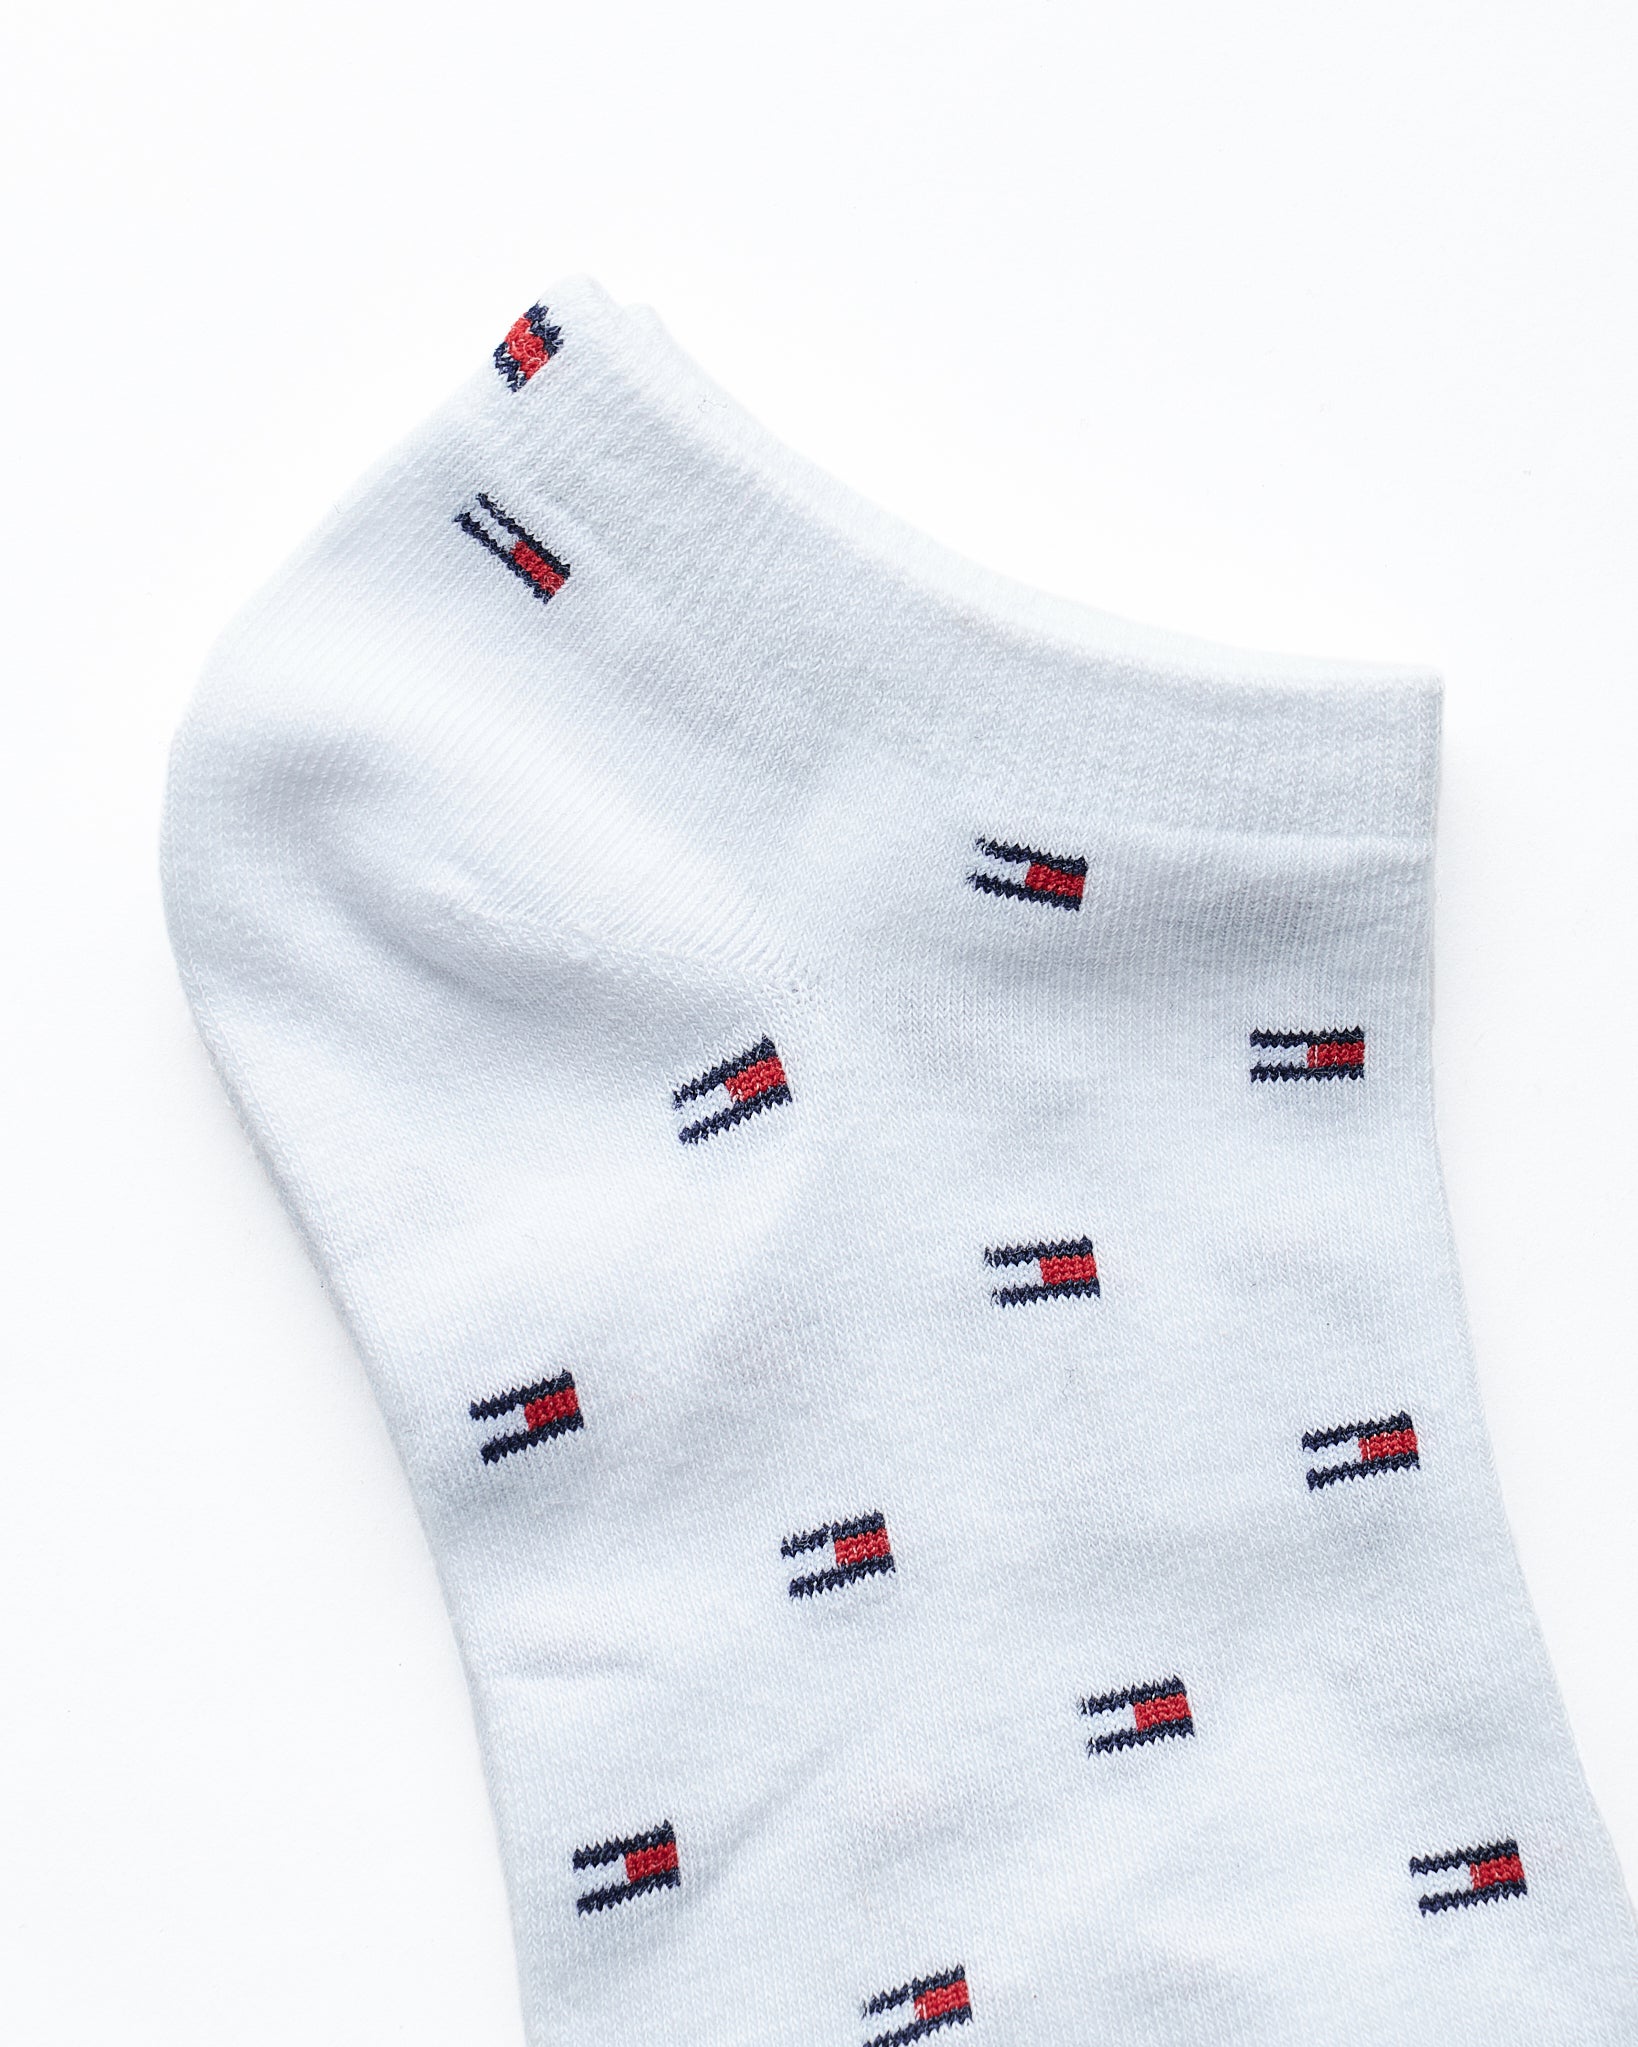 MOI OUTFIT-Flag Over Printed Low Cut 3 Pairs Socks 7.90